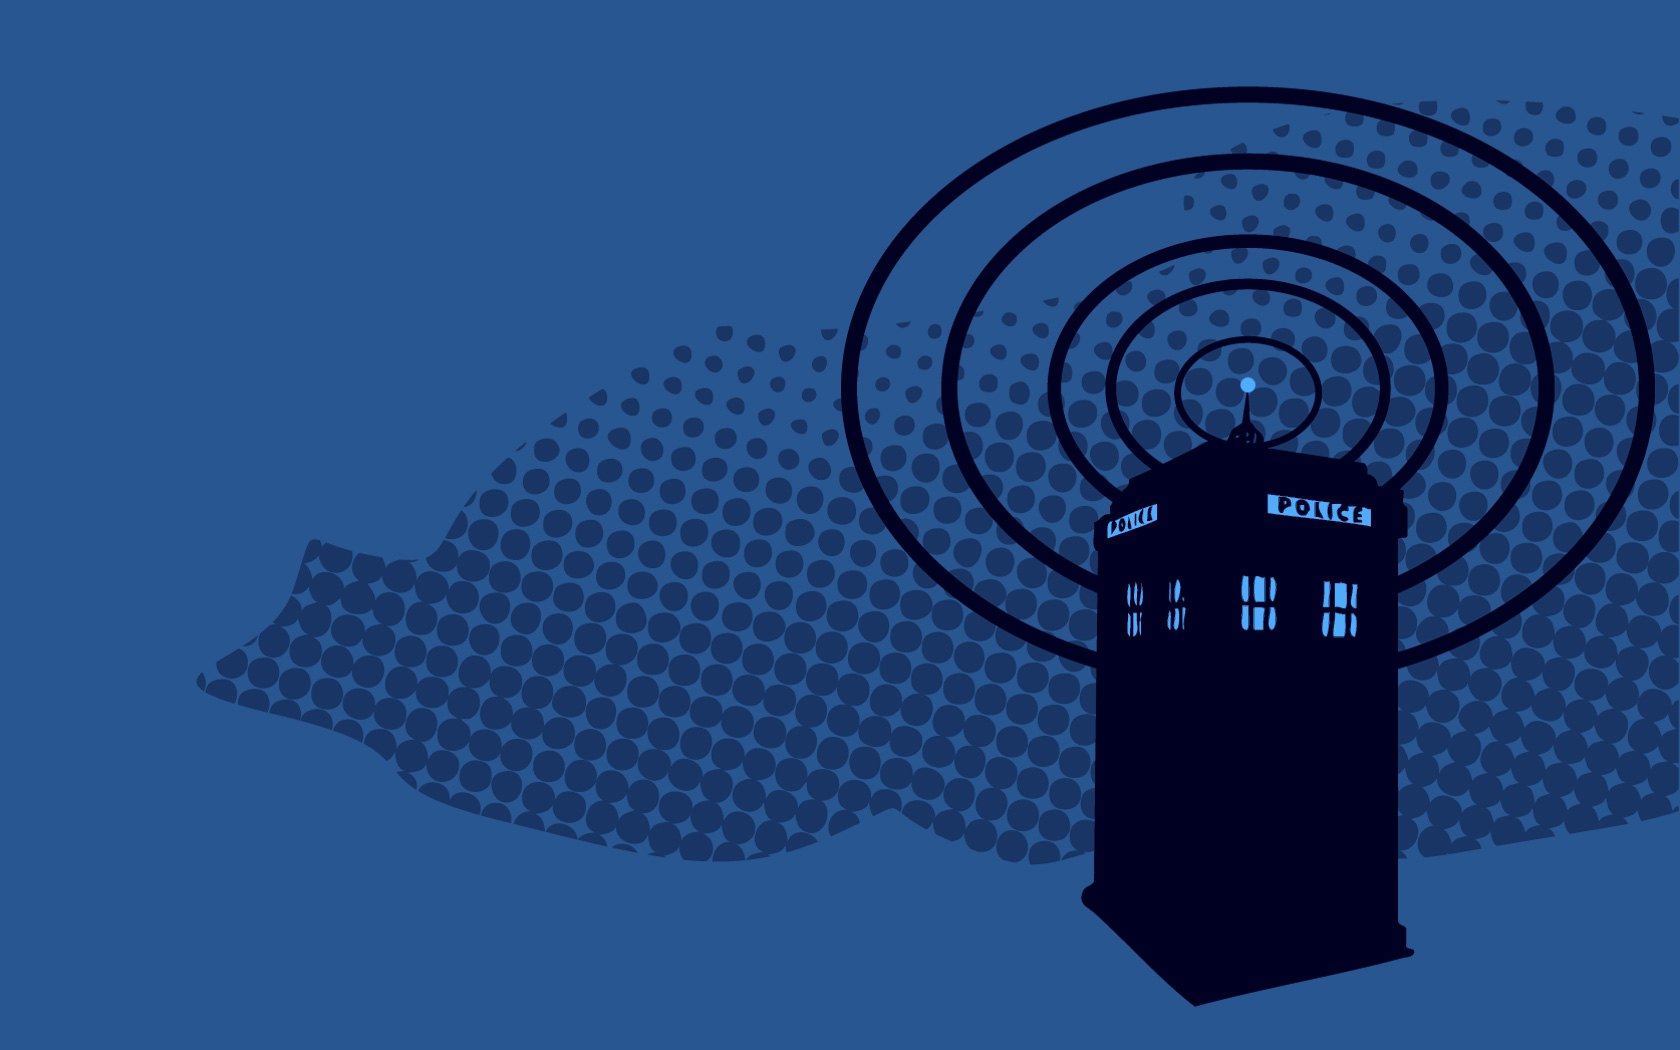 TV Show Doctor Who Wallpaper